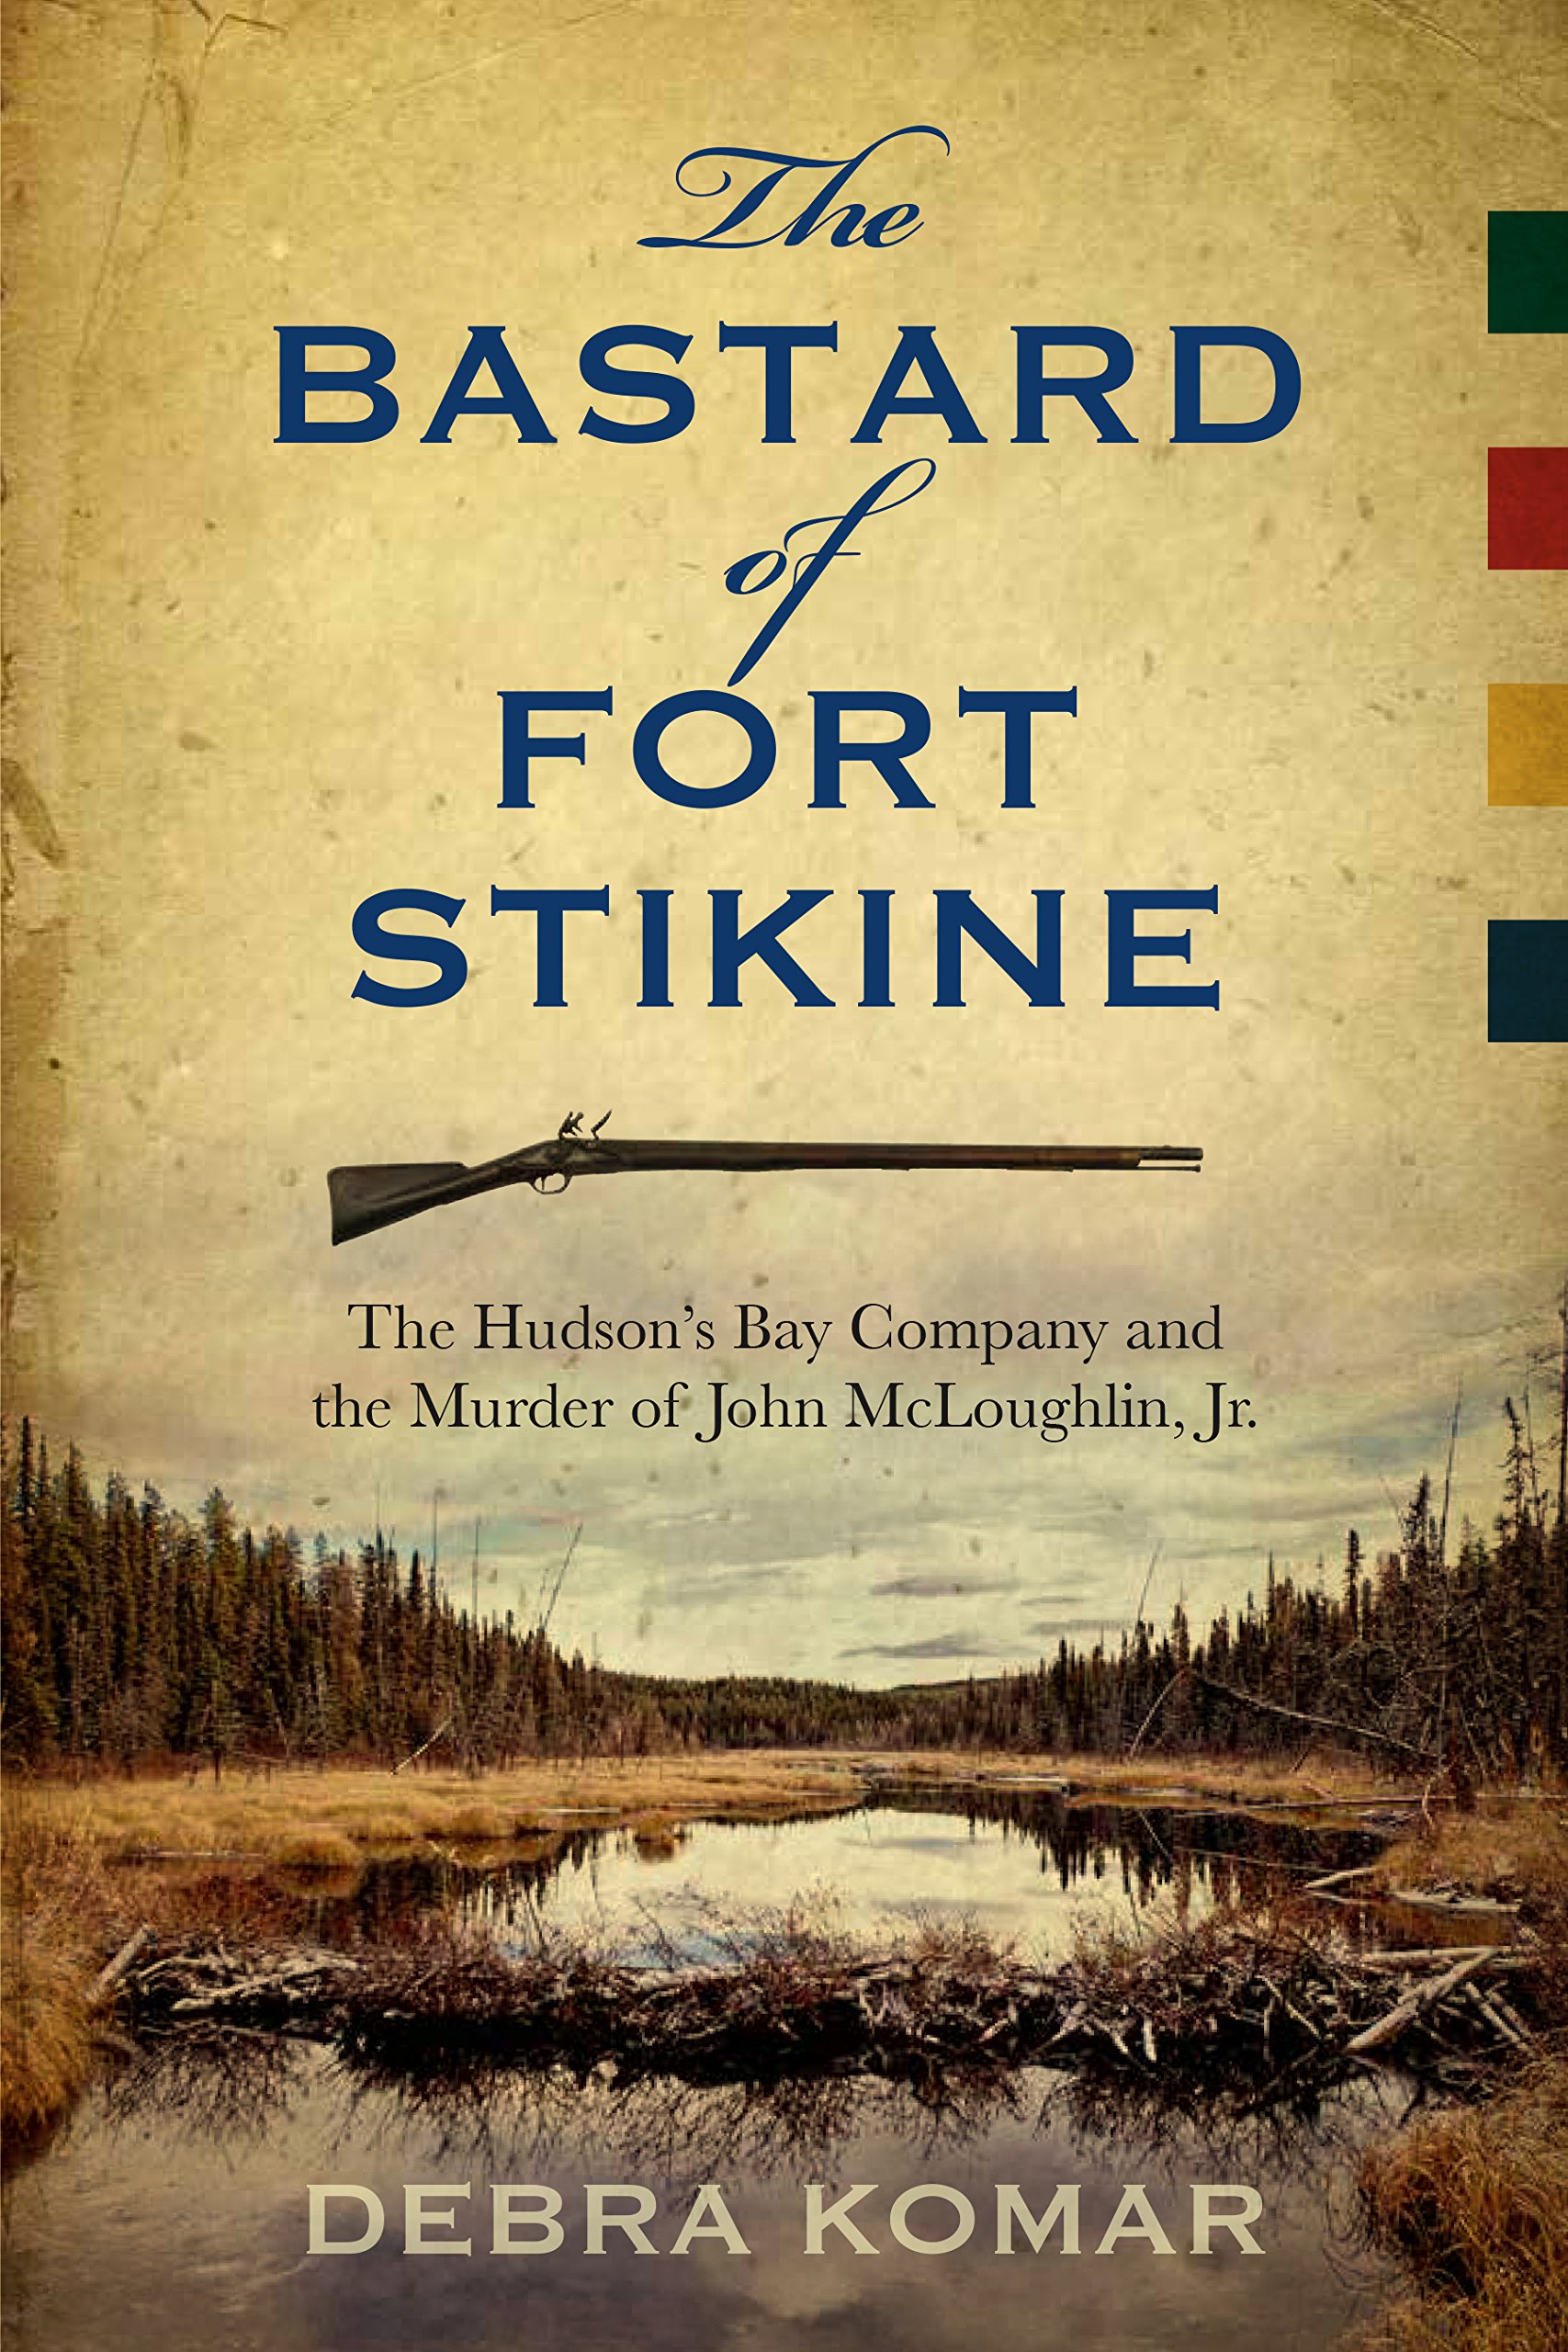 The Bastard of Fort Stikine: The Hudson's Bay Company and the Murder of John McLoughlin, Jr.